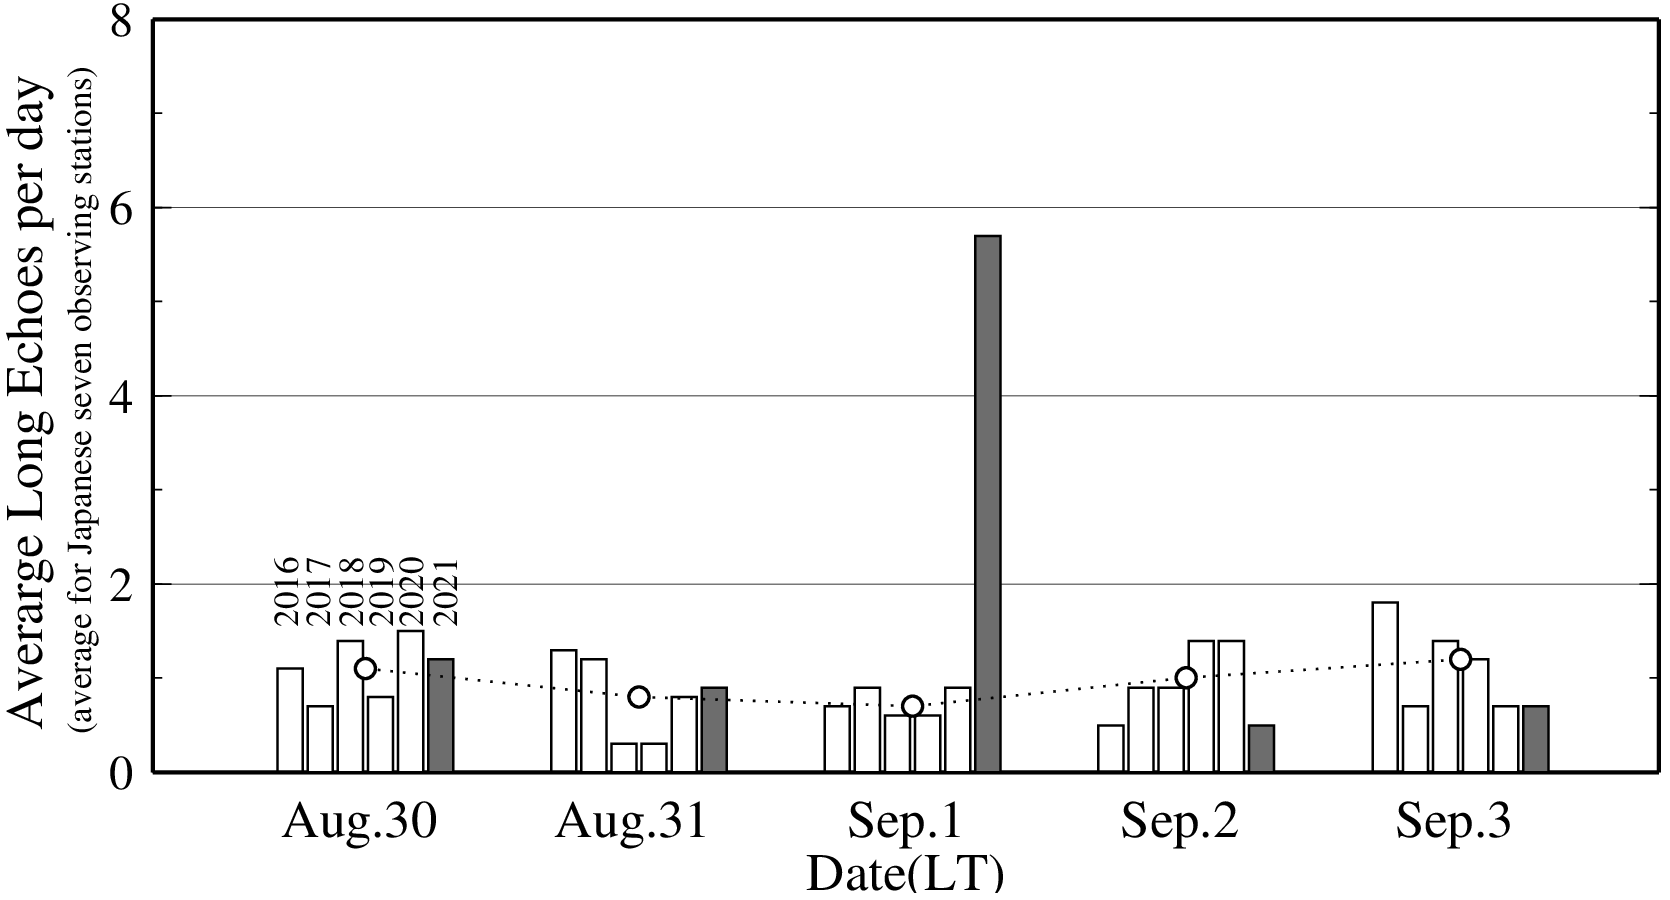 Figure 4 – Comparison of the number of long echoes for a day